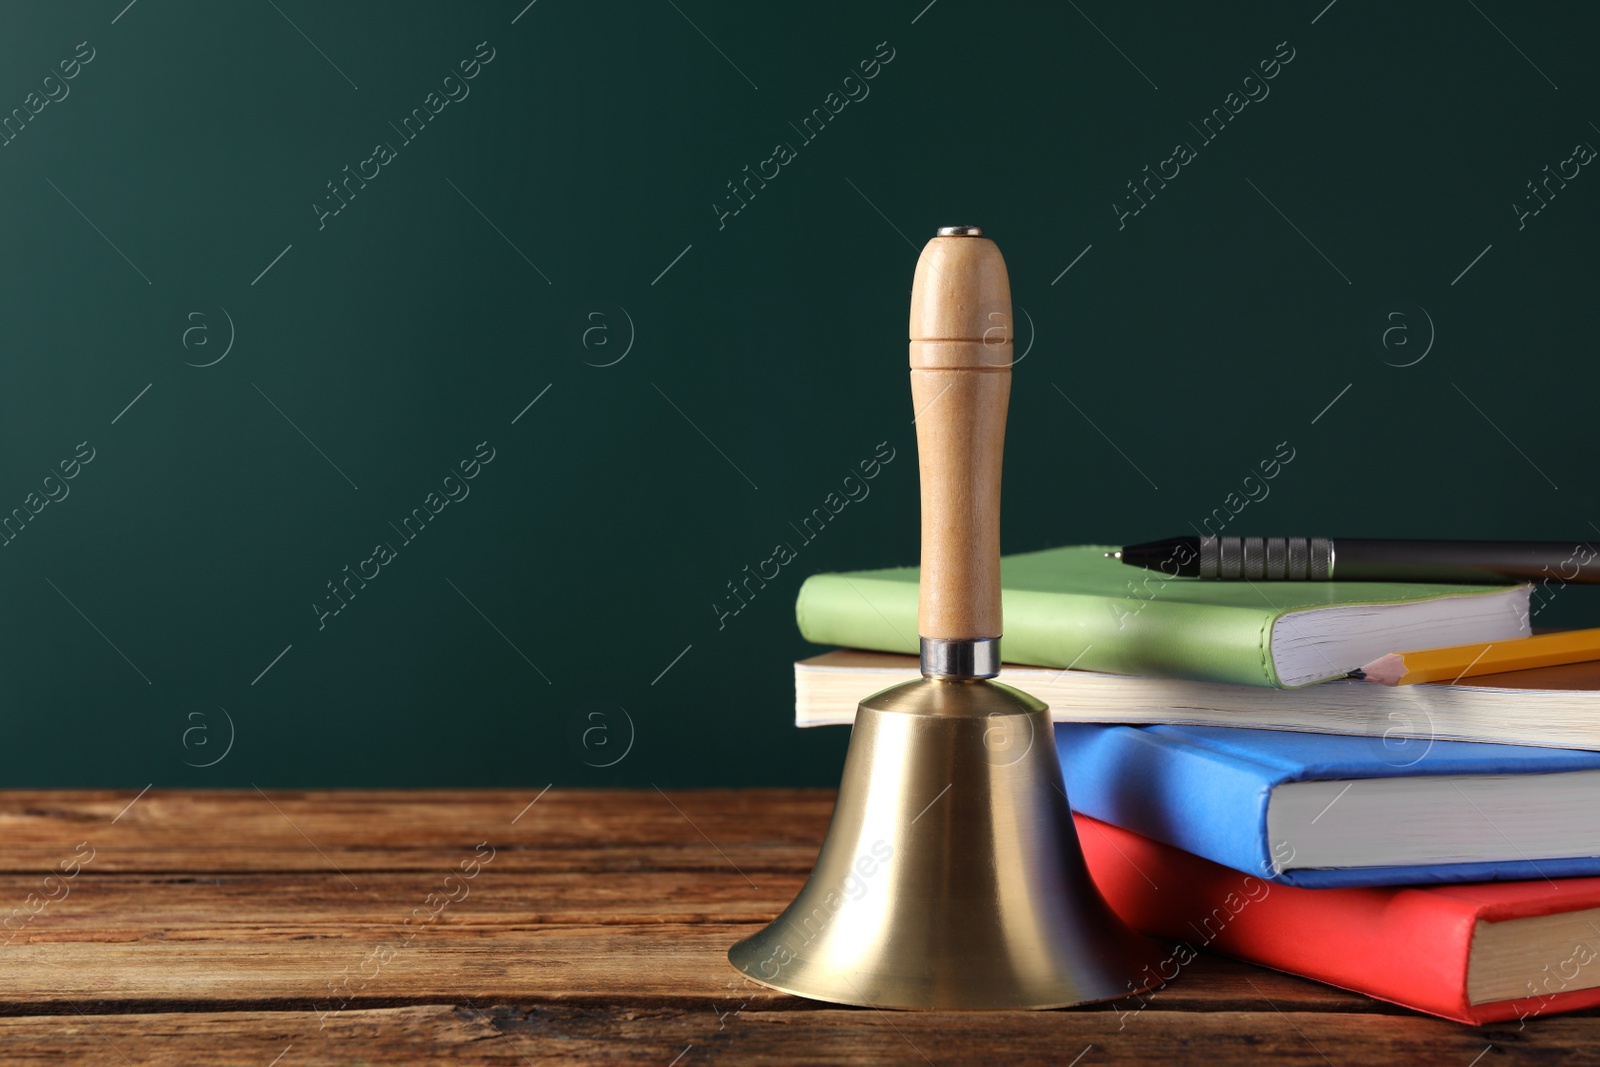 Photo of Golden bell, books and stationery on wooden table near green chalkboard, space for text. School days